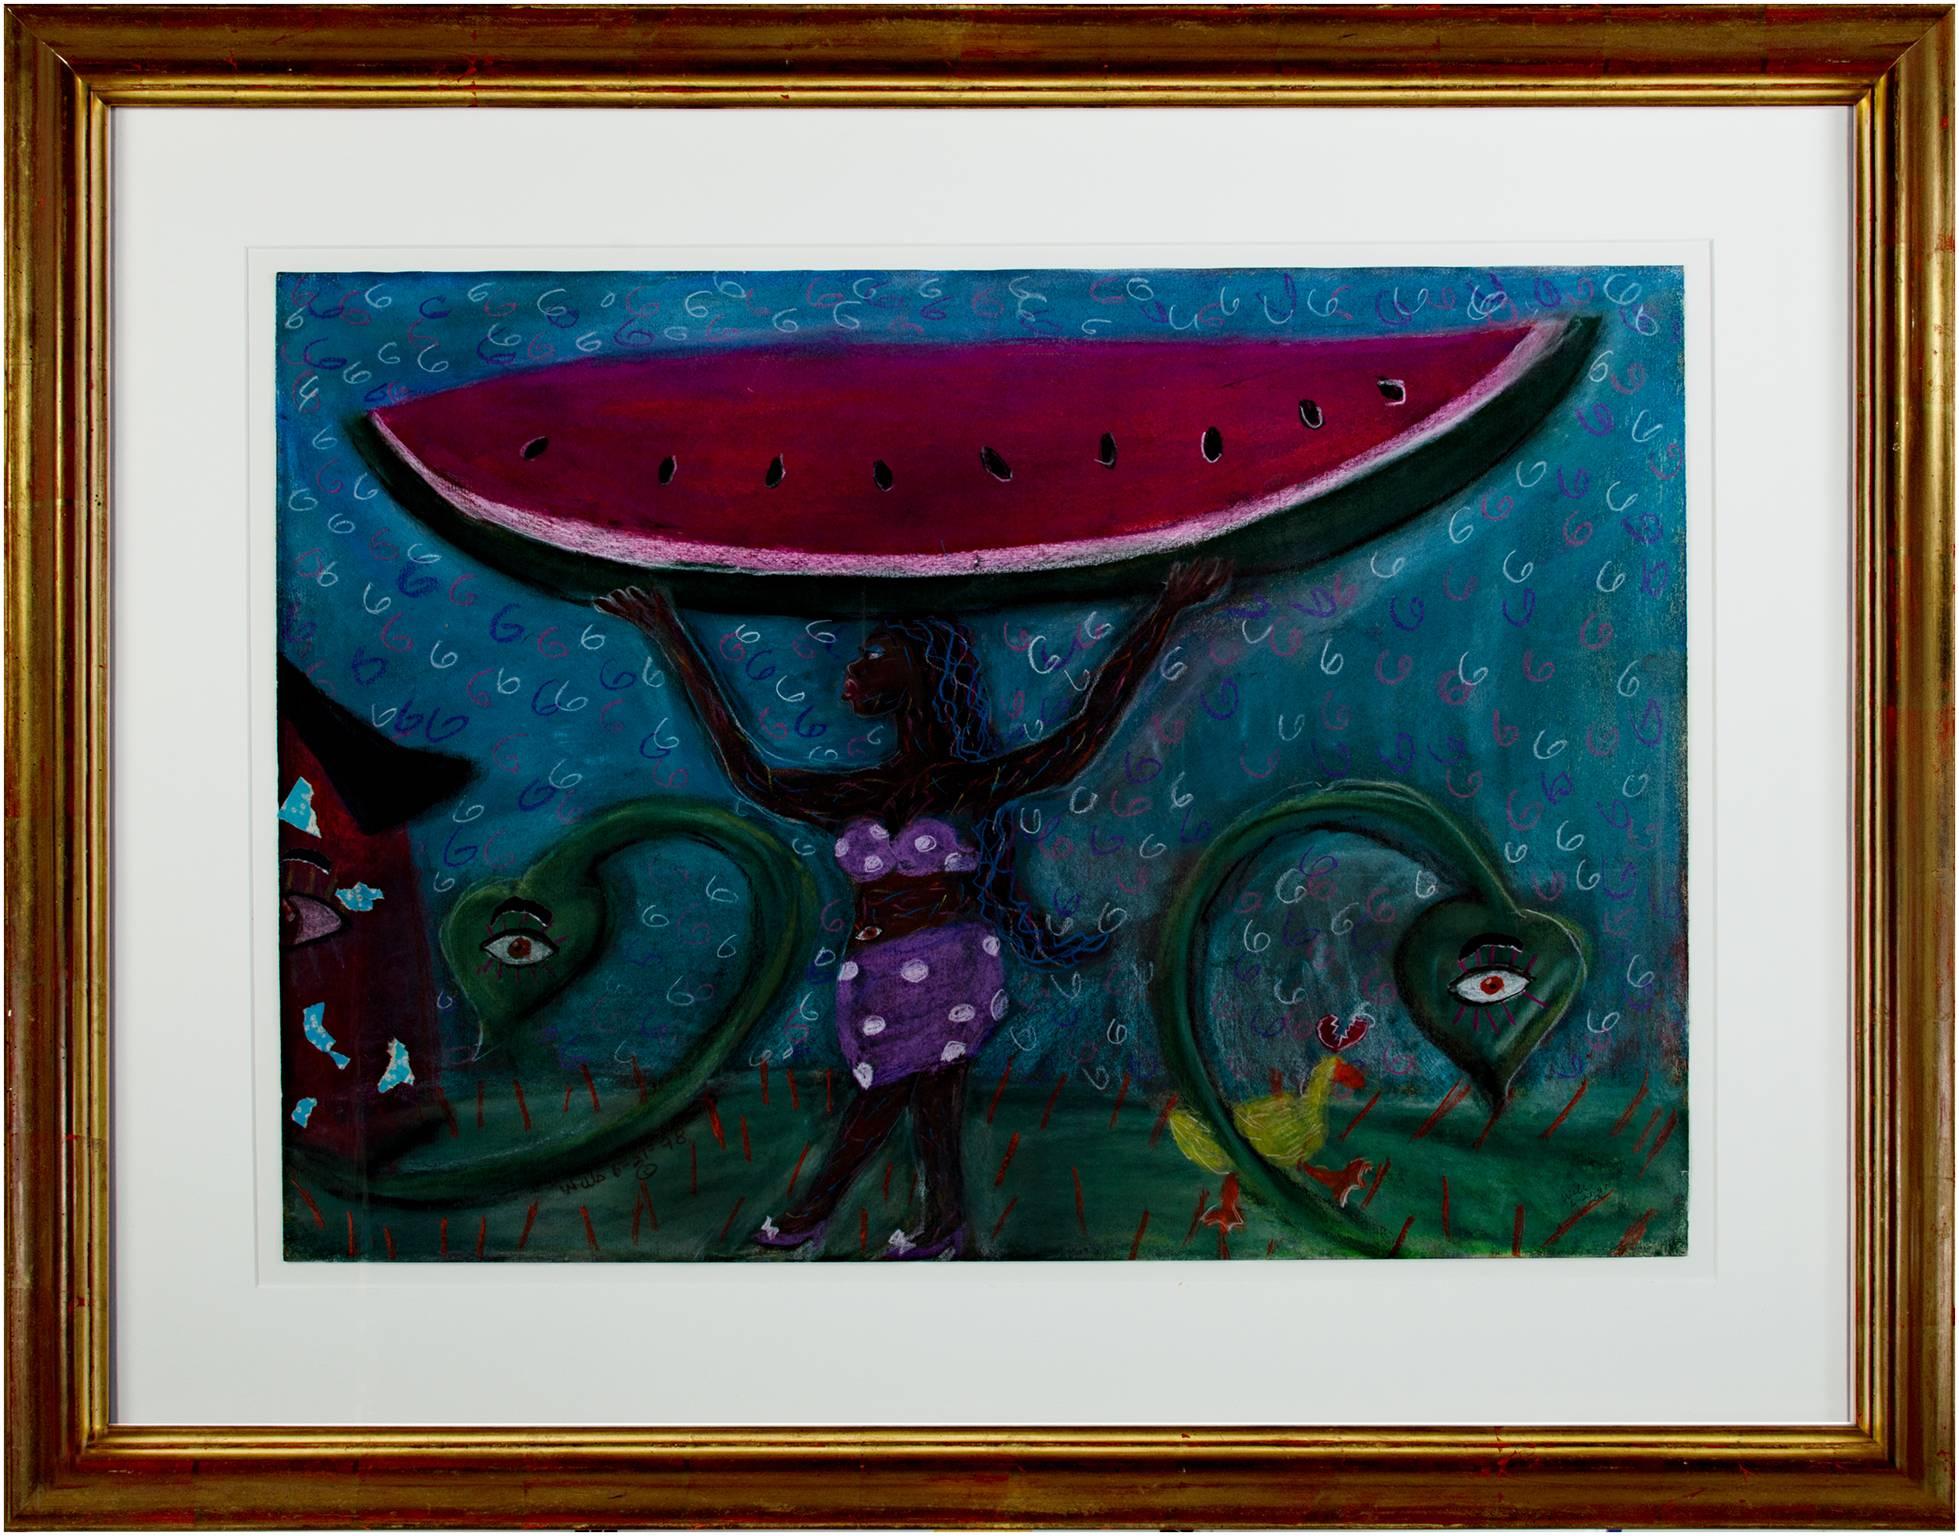 "Melon Scope" is an original pastel drawing on paper by Della Wells. The artist signed the piece in the lower right. This work depicts a black woman carrying a large slice of watermelon, which stands for a stereotype of African Americans. Two